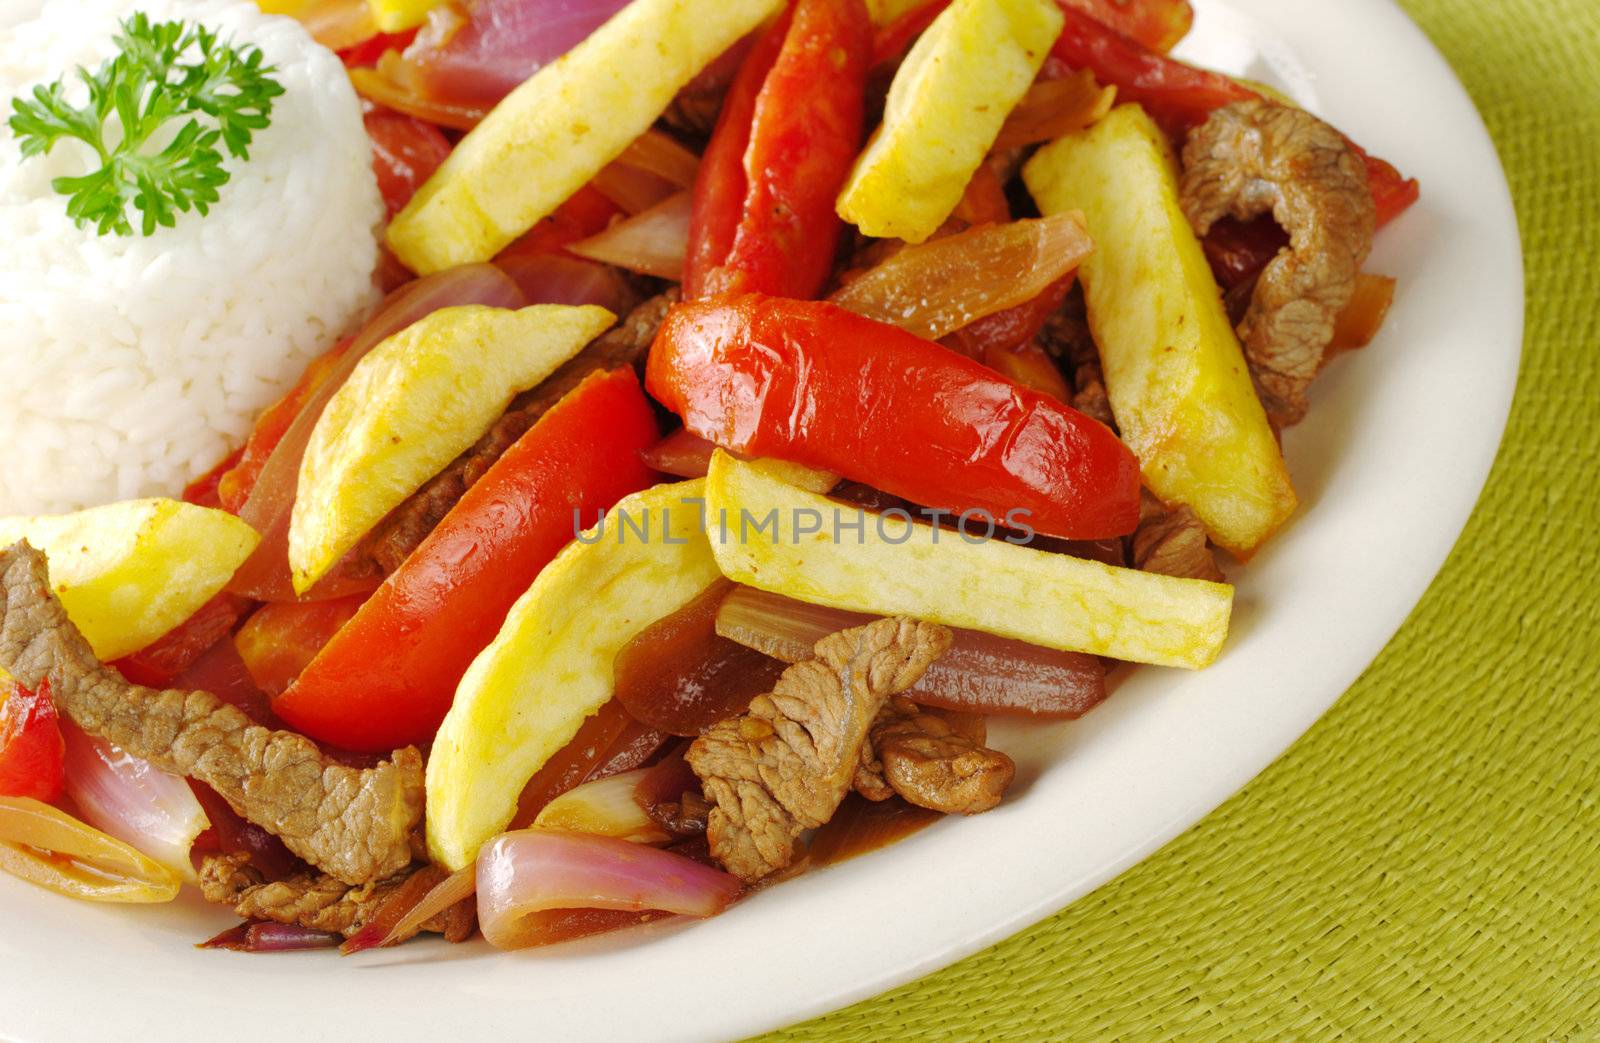 A typical Peruvian dish called Lomo Saltado which is made of beef, onions, tomatoes and is accompanied by fried potatoes and rice (Selective Focus, Focus on the front of the dish)